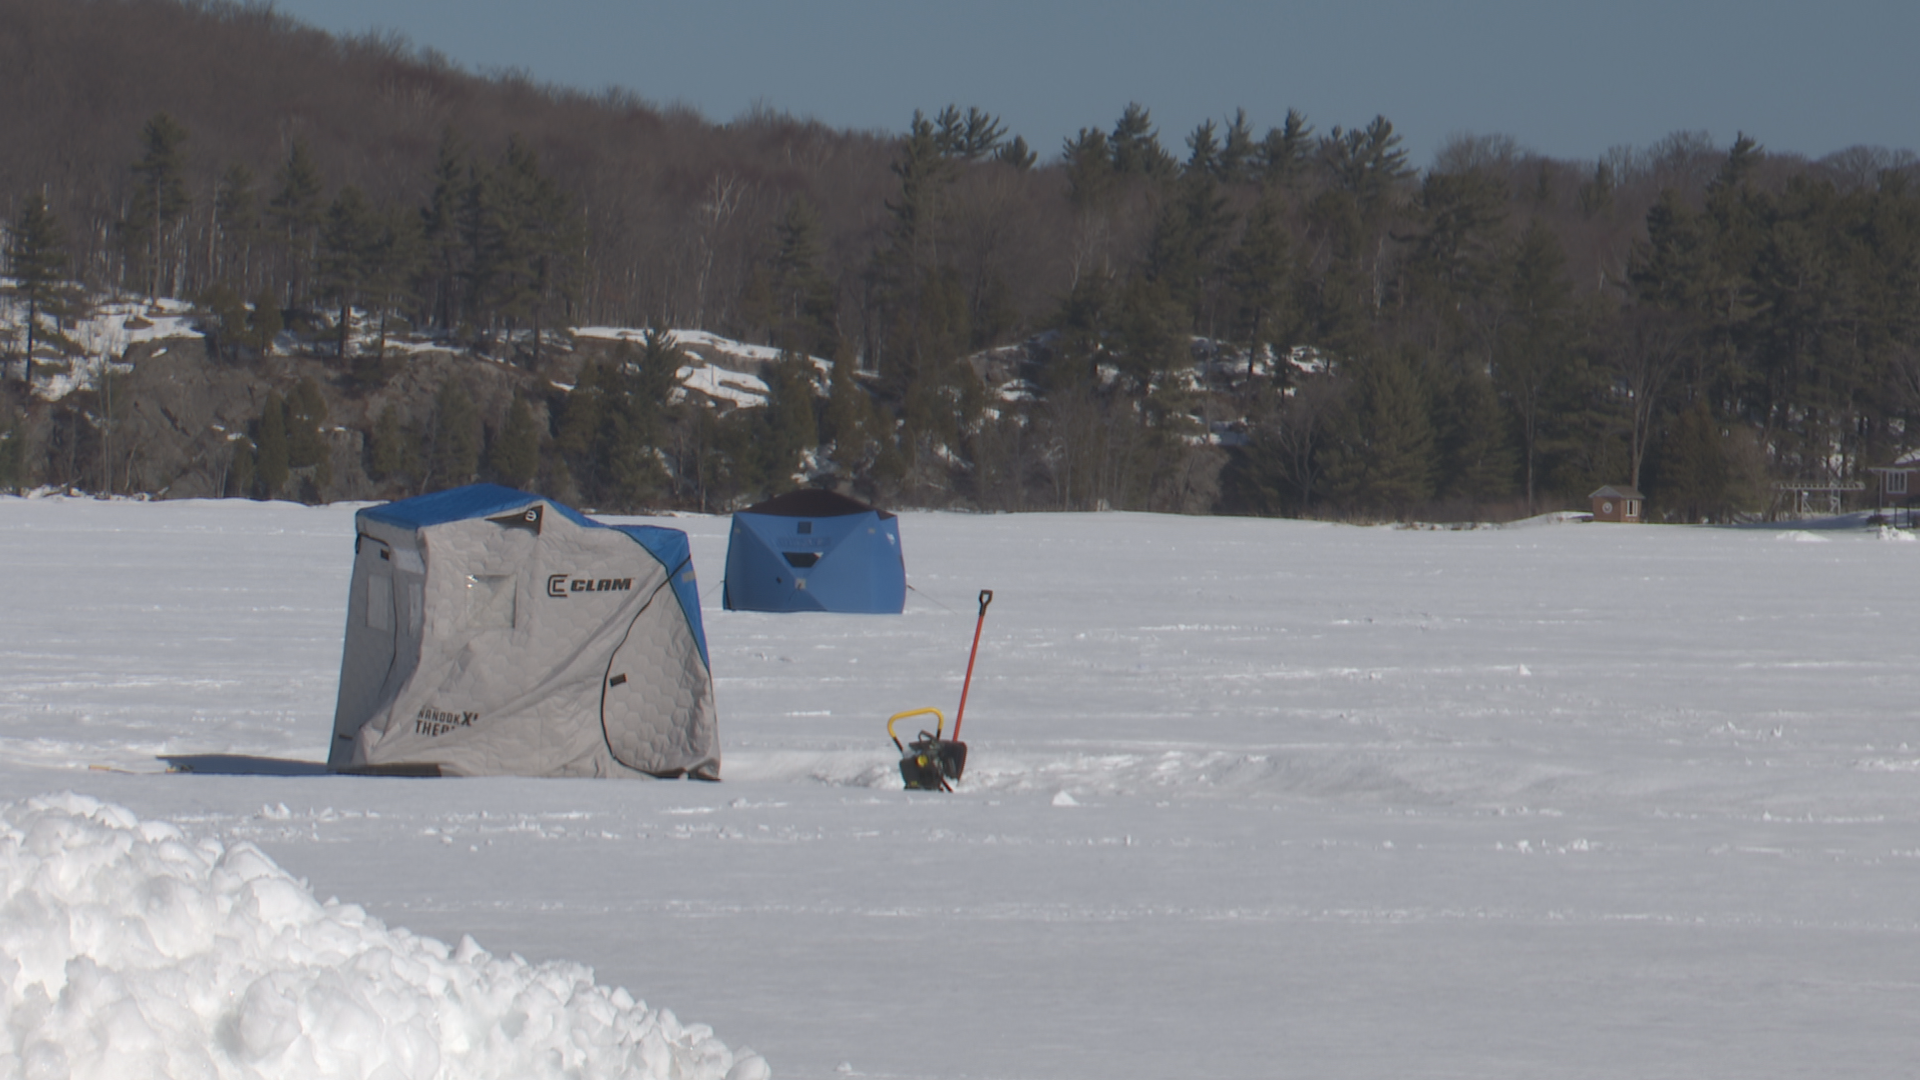 Ice shanty removal dates begin this weekend for parts of Lower Peninsula